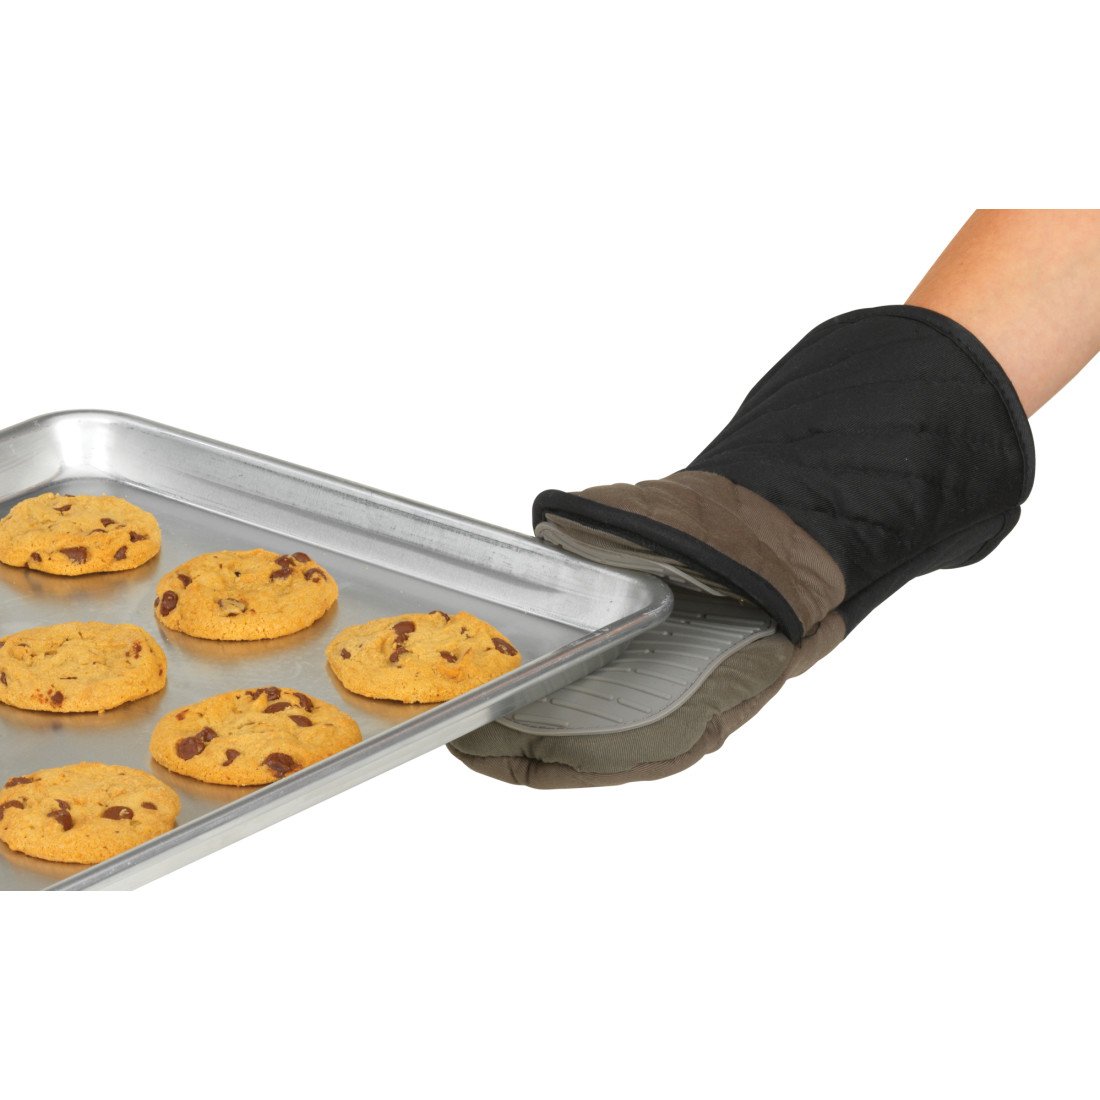 Starfrit Silicone Oven Glove - Shop Utensils & Gadgets at H-E-B